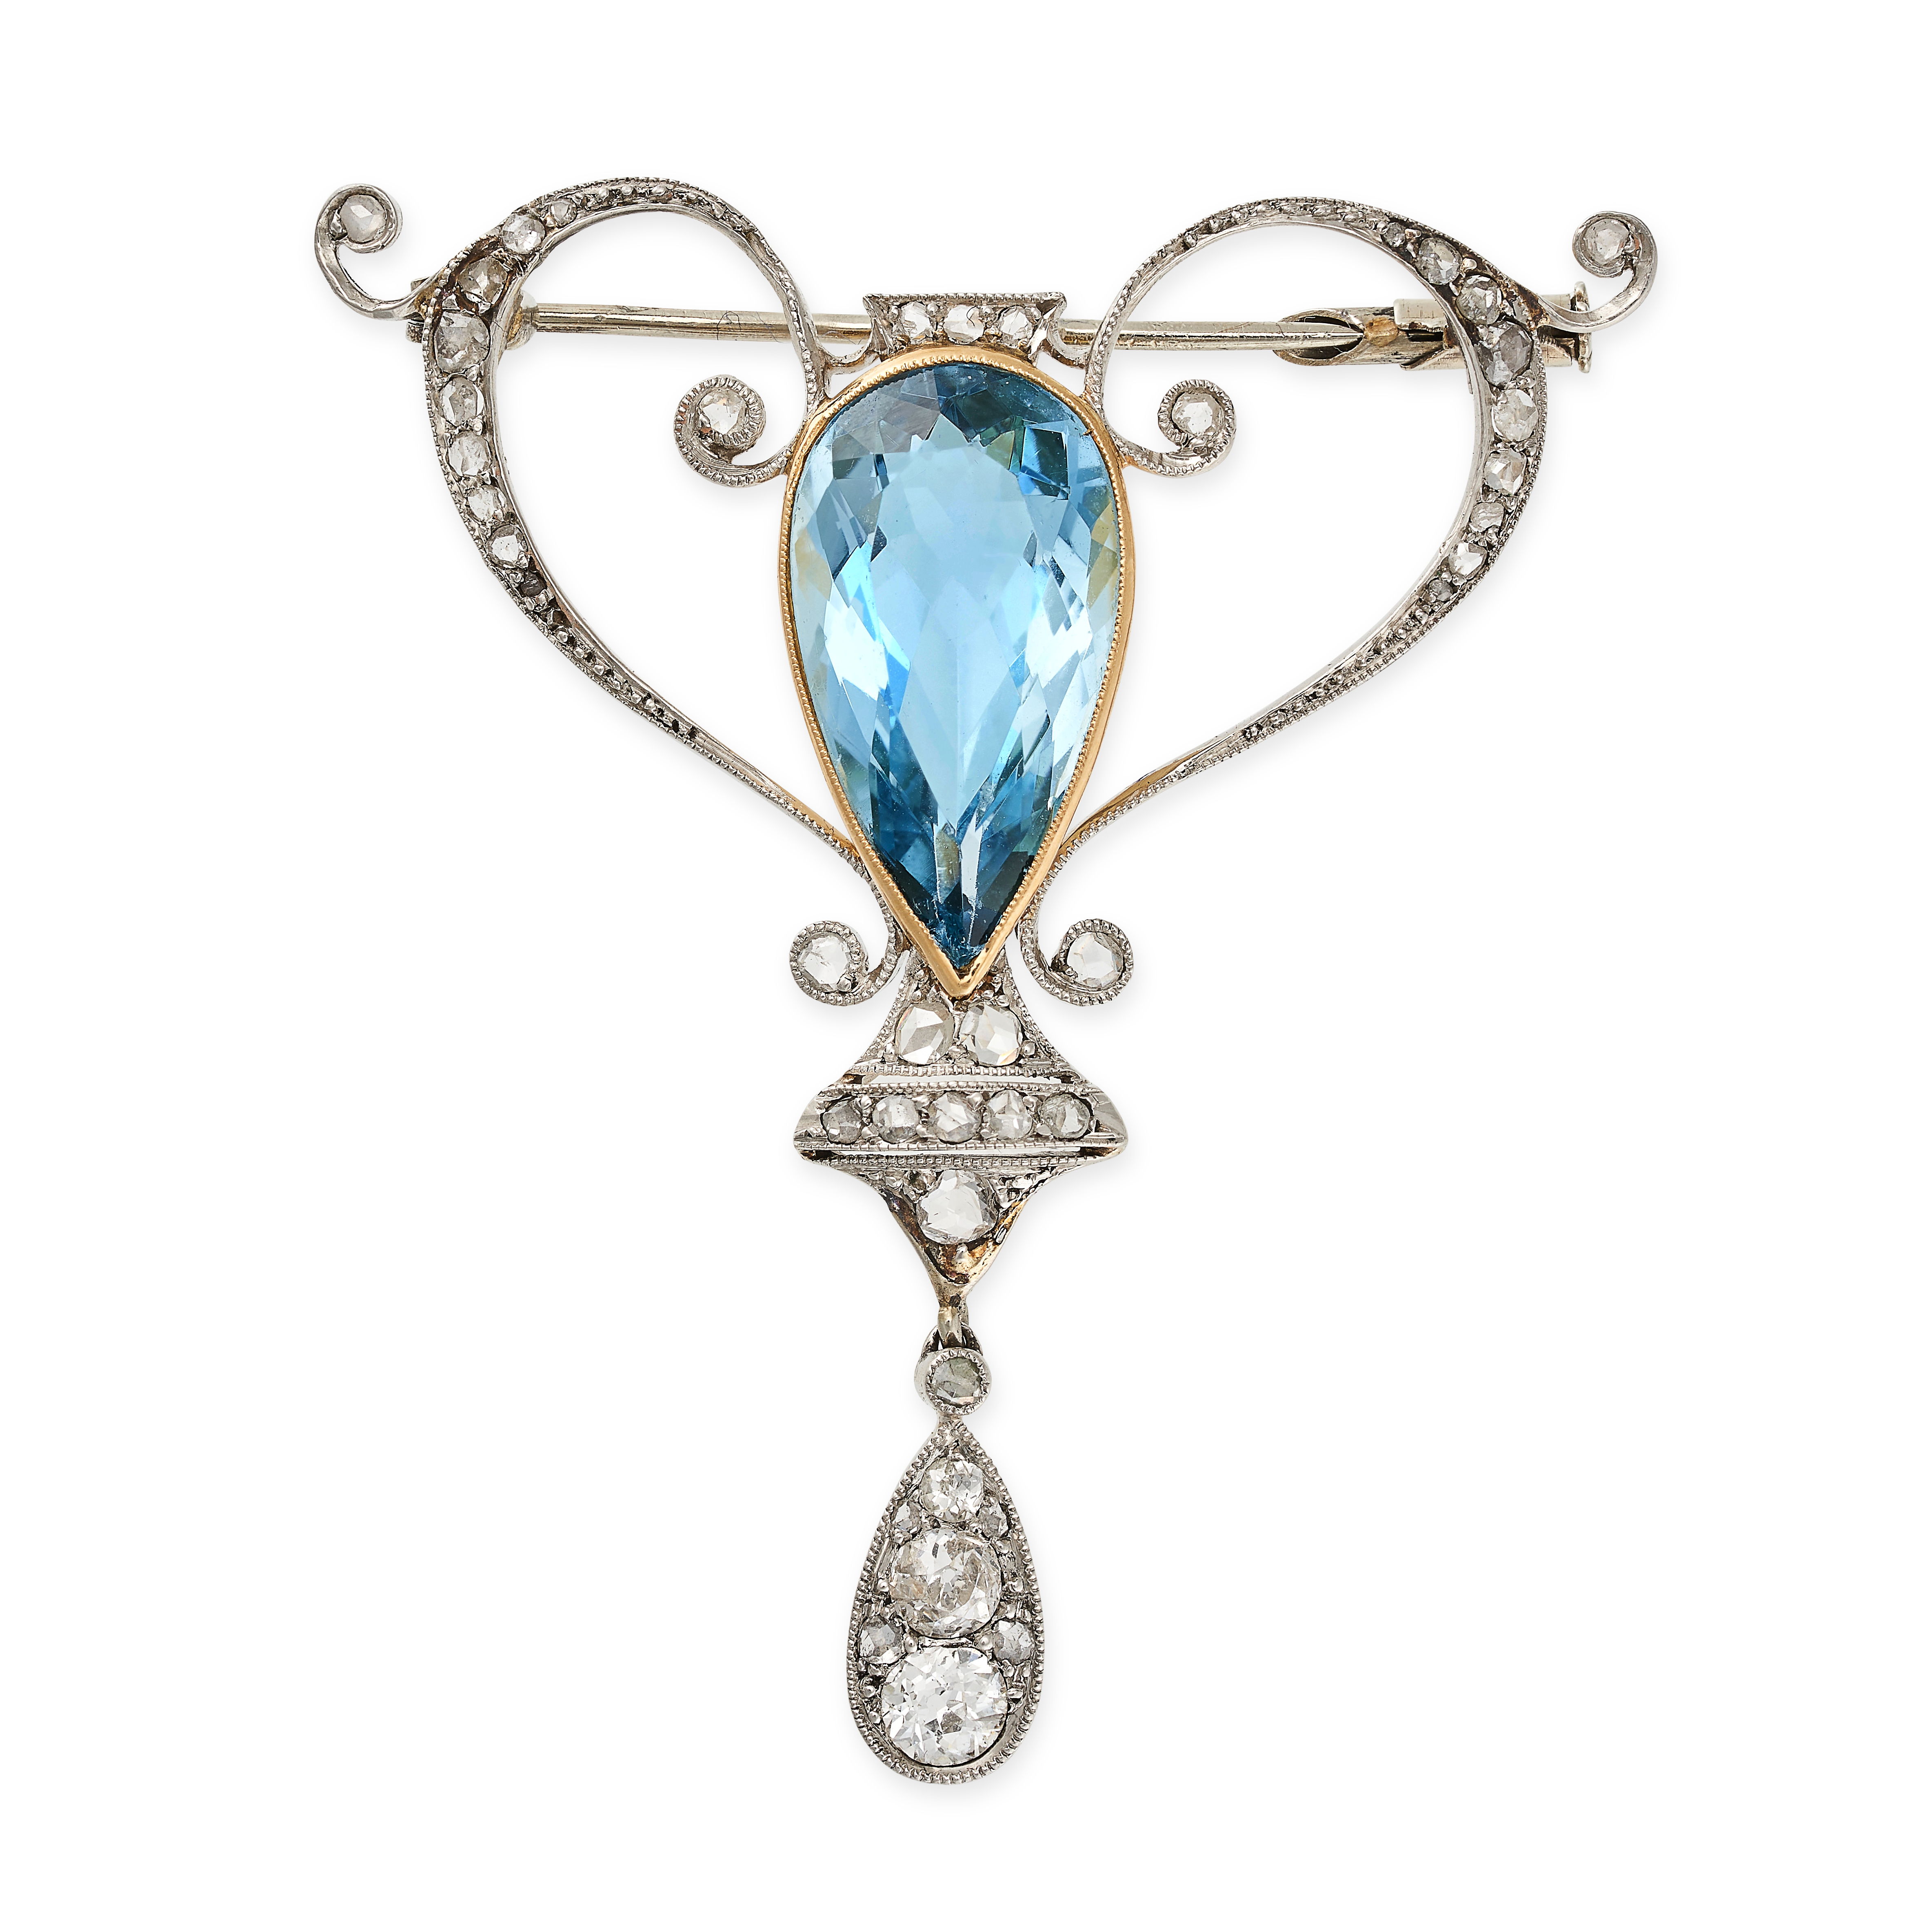 AN ANTIQUE EDWARDIAN AQUAMARINE AND DIAMOND BROOCH in yellow gold and platinum, set with a pear c...